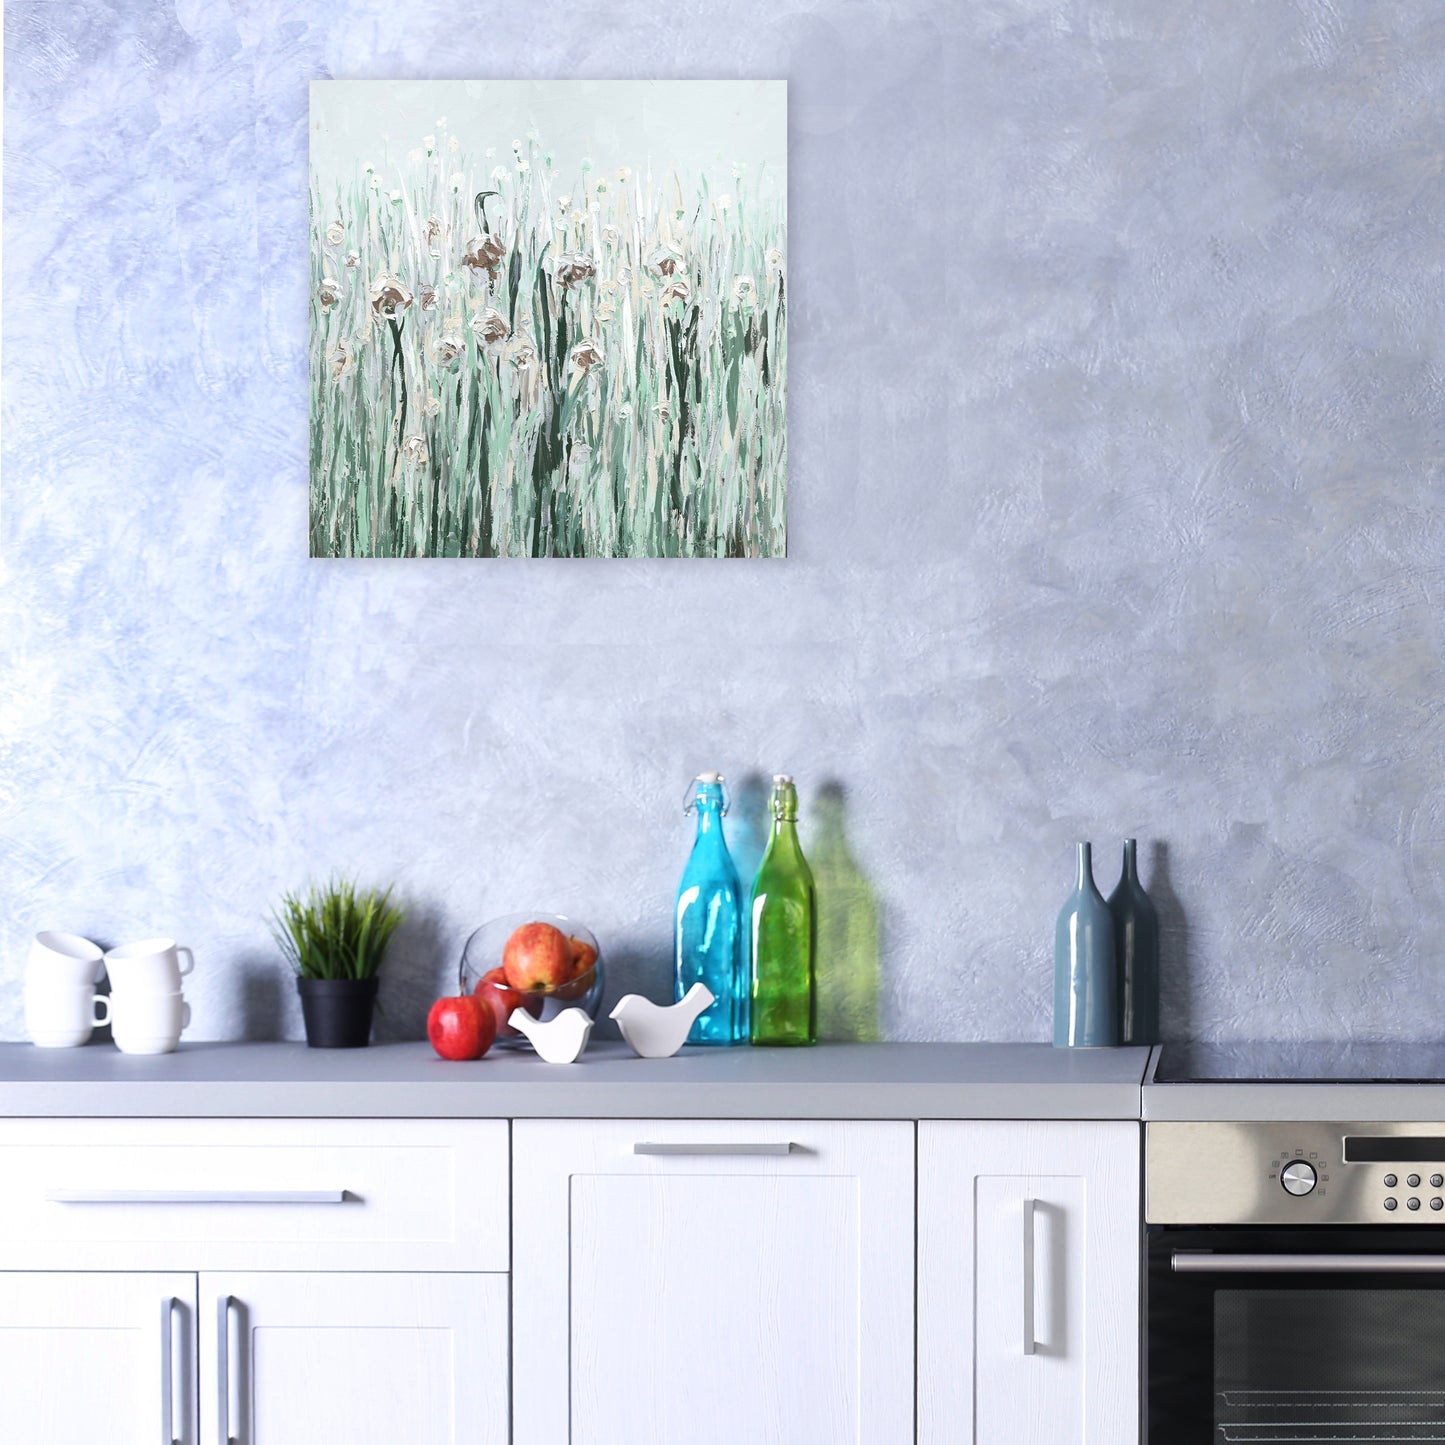 Flowers Oil Painting on Wrapped Canvas. wall art, canvas artwork for living room, bedroom, office